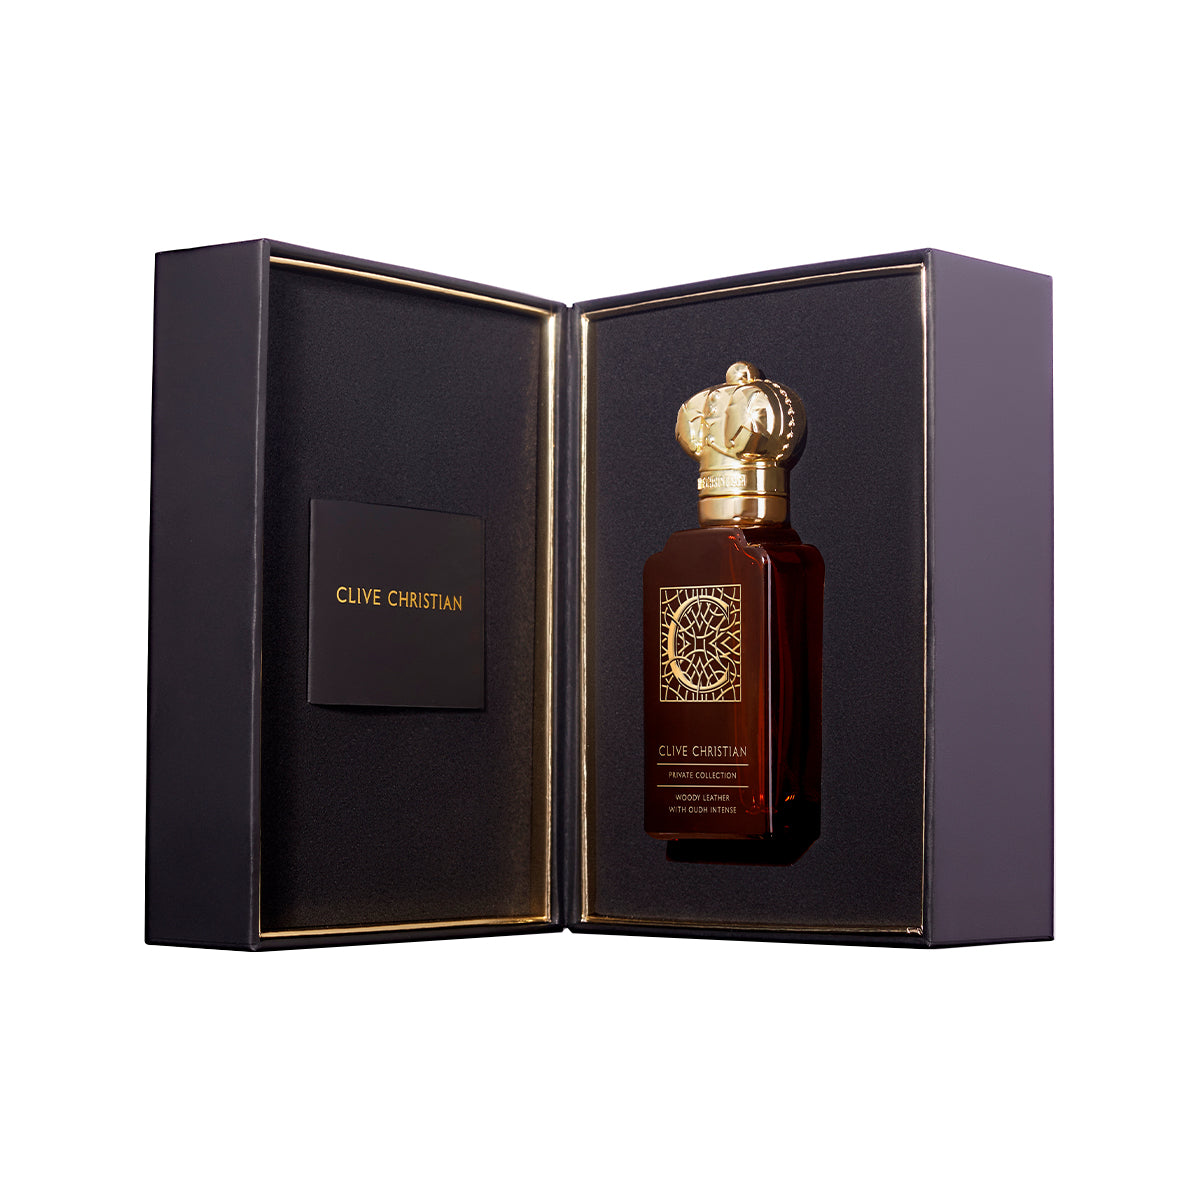 C Woody Leather - Clive Christian - Parfum 50 ml